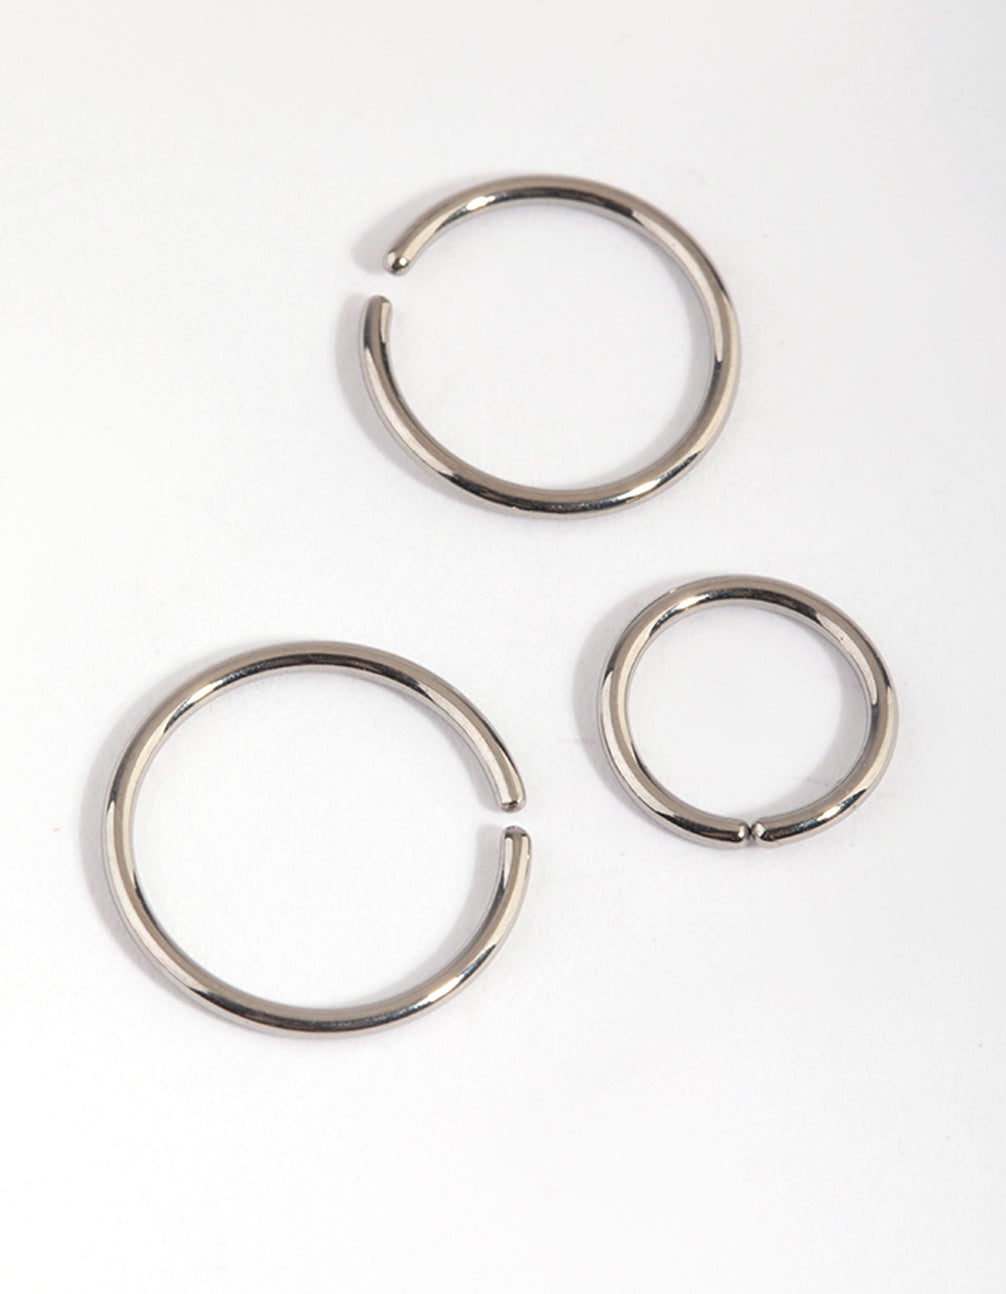 The Fine Ball Nose Ring | REGALROSE – REGALROSE